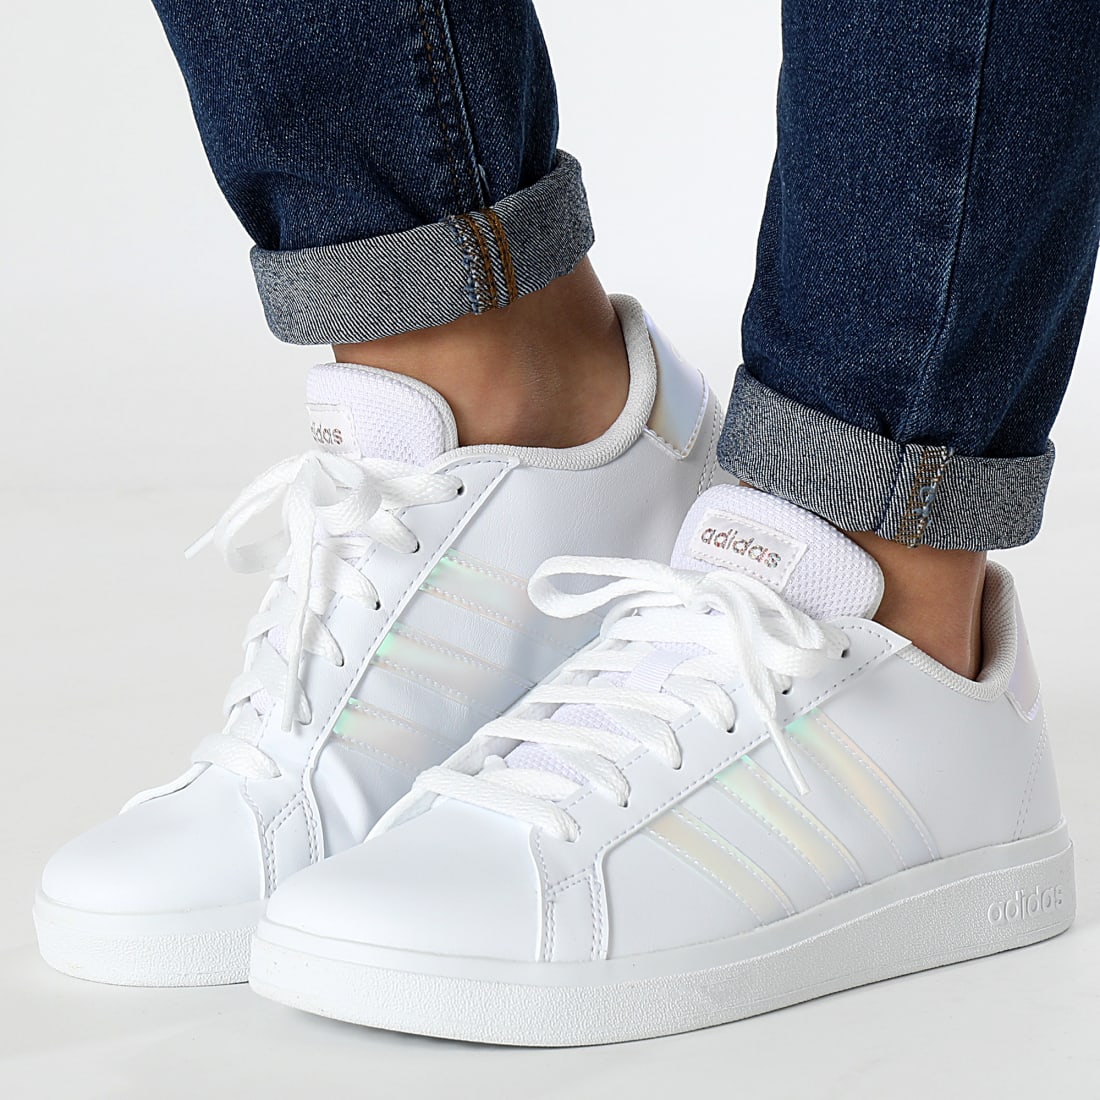 adidas Grand Court Chaussures Fille